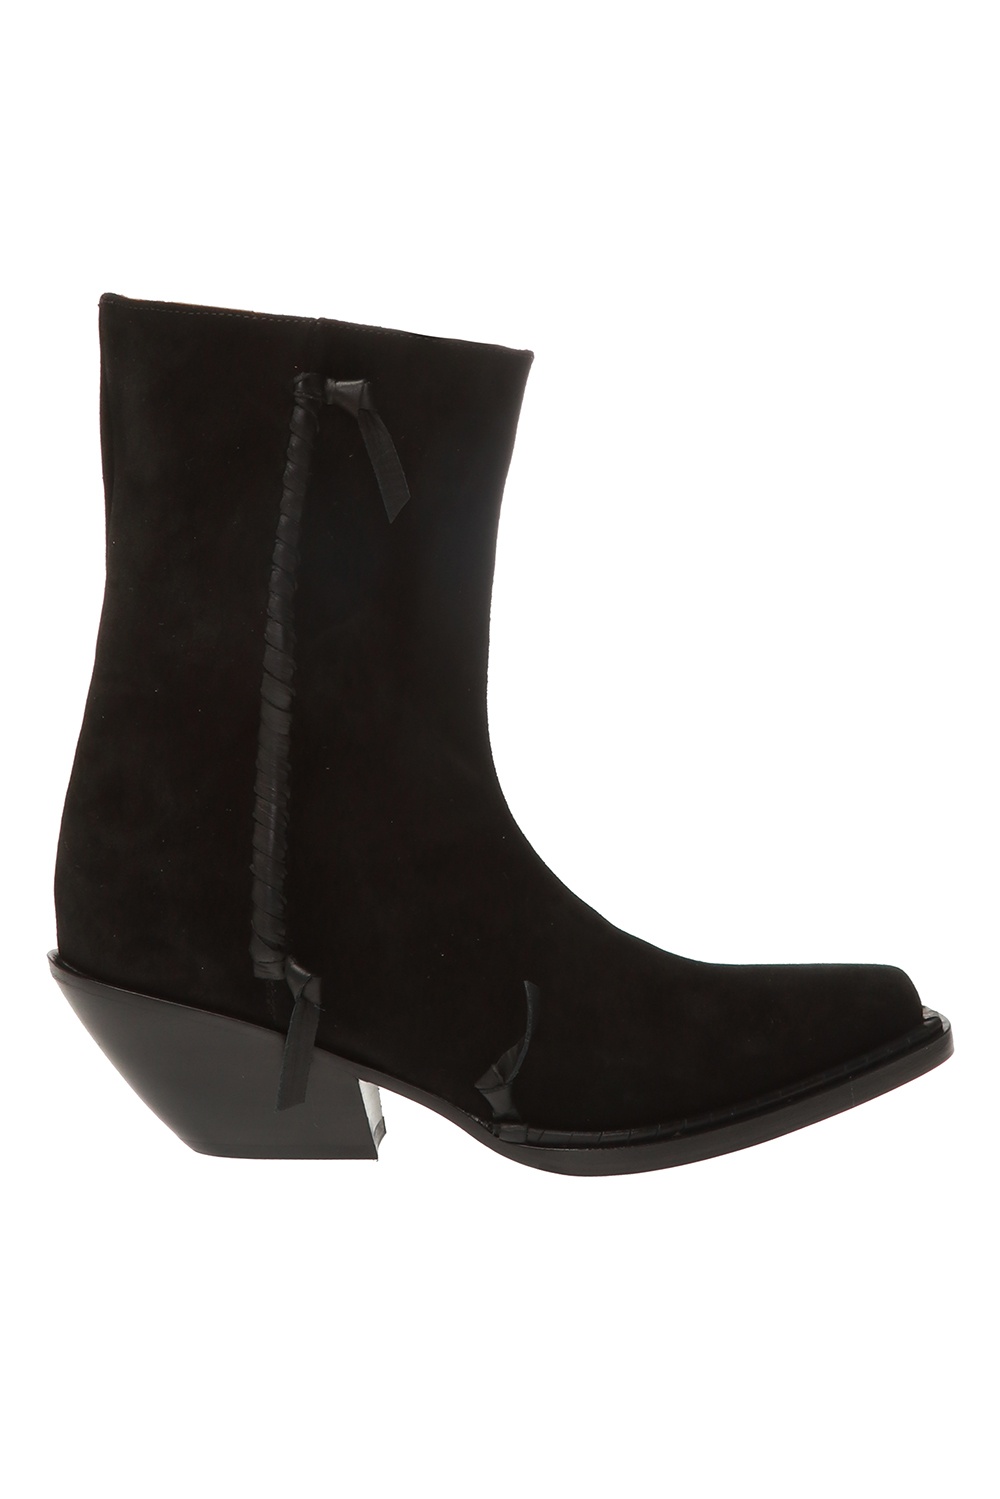 Acne Studios 'Breanna' heeled ankle boots | Women's Shoes | Vitkac